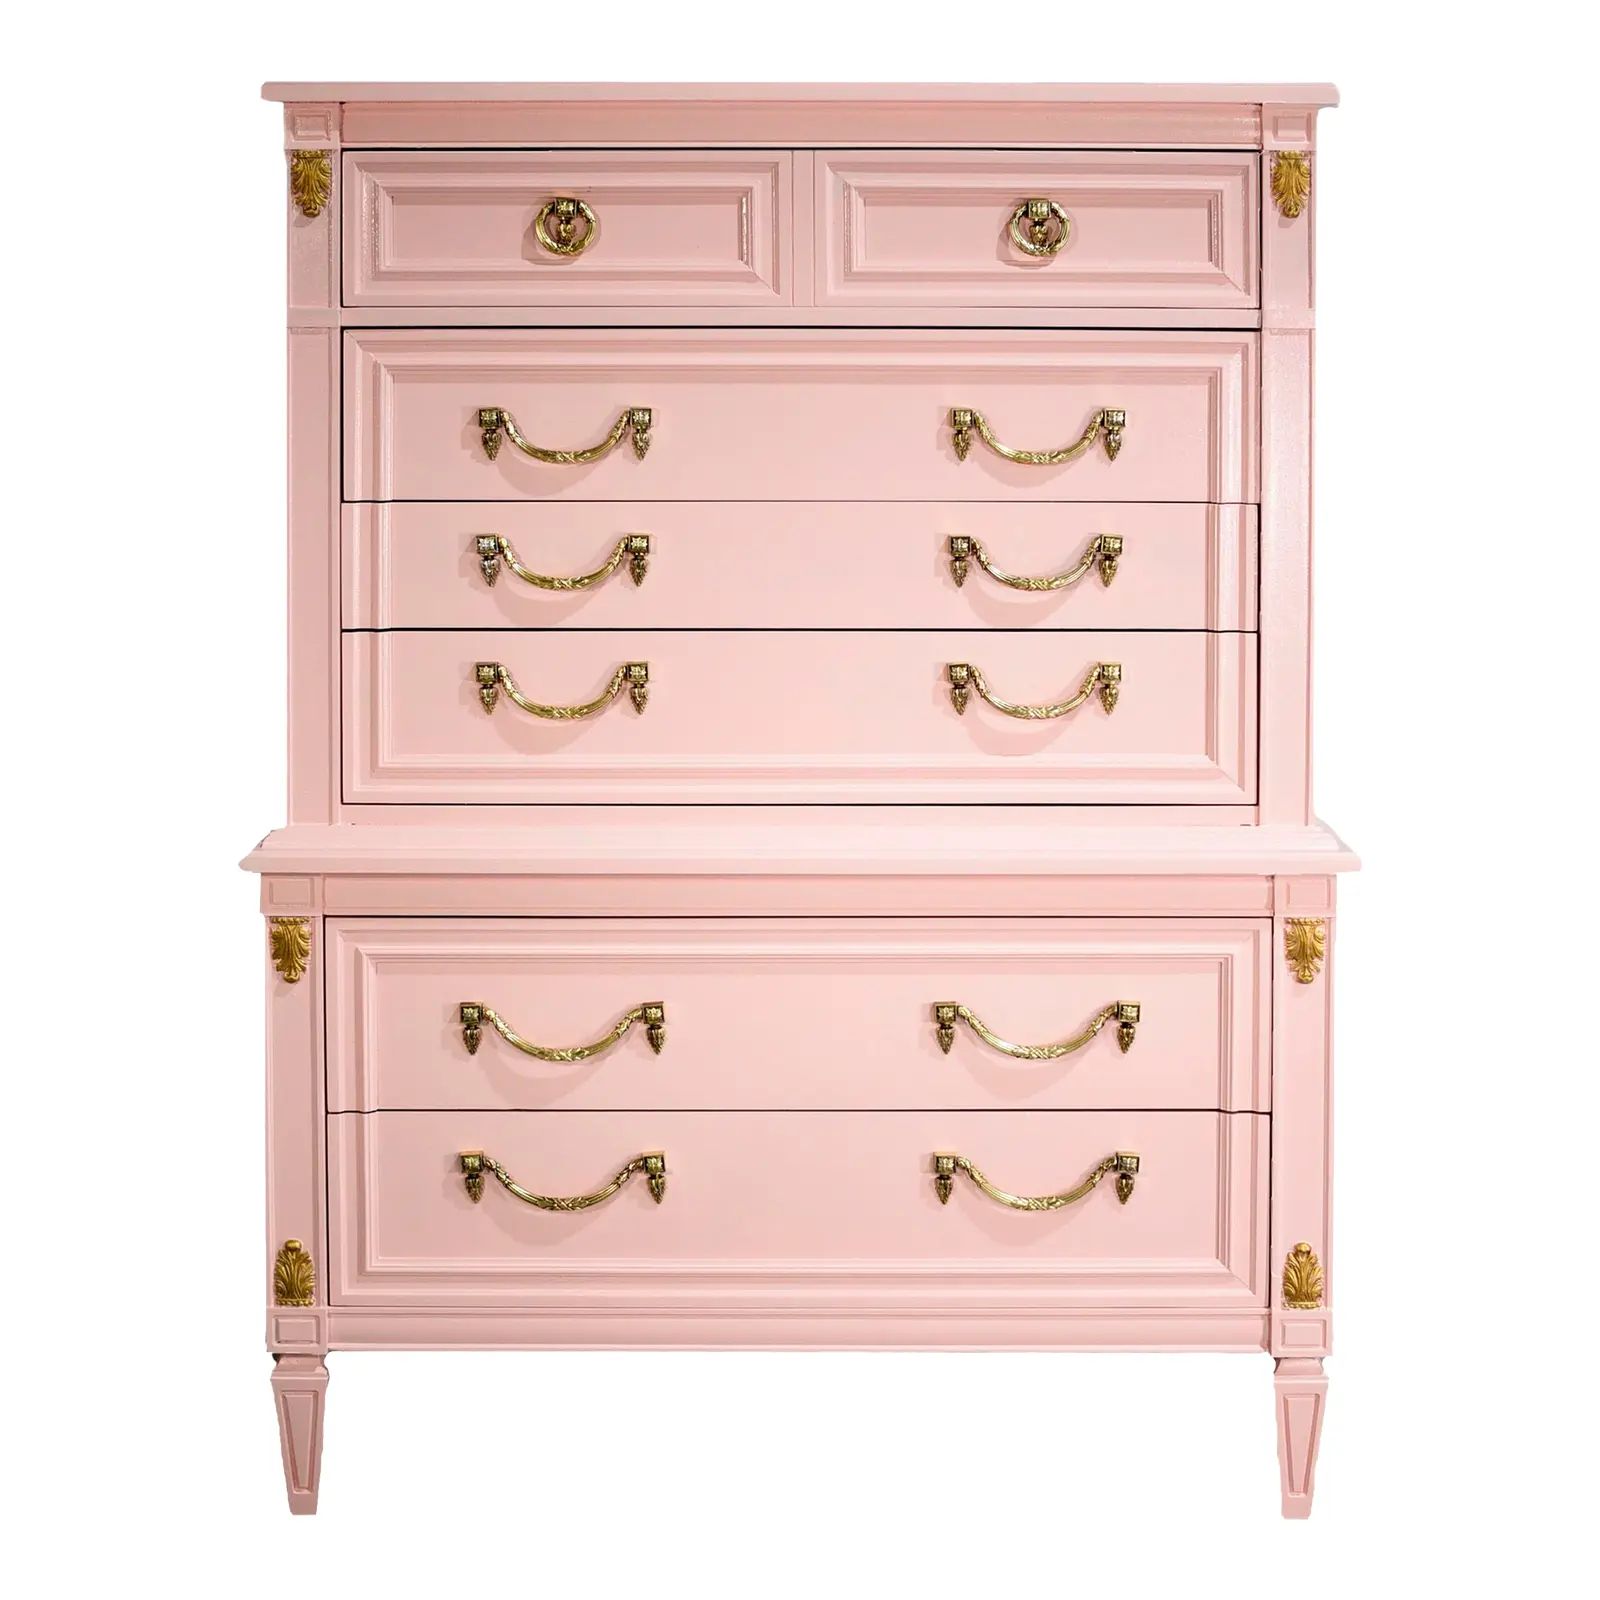 Vintage Neoclassical Highboy With Wreath Brass Hardware in Pink - Newly Painted | Chairish